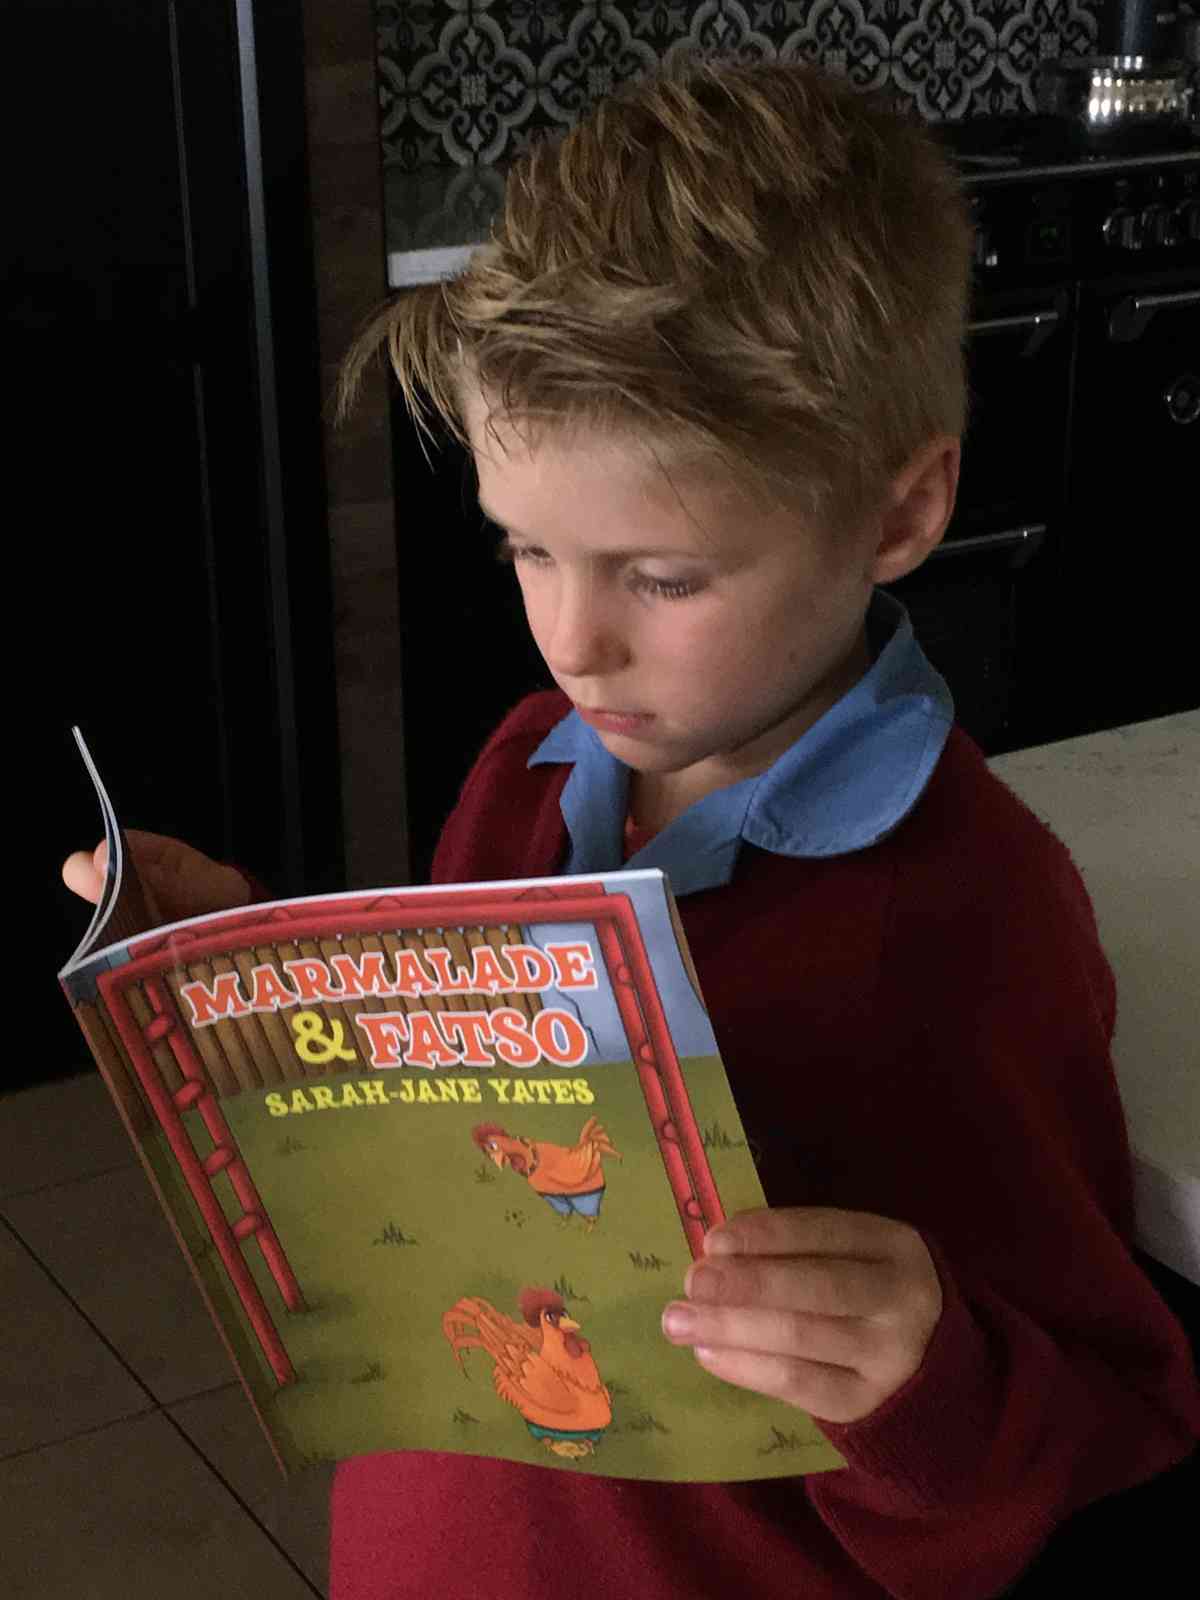 Sarah’s-Children-Enjoyed-Reading-Her-Book-‘Marmalade-And-Fatso’-Austin-Macauley-Publisher-Online